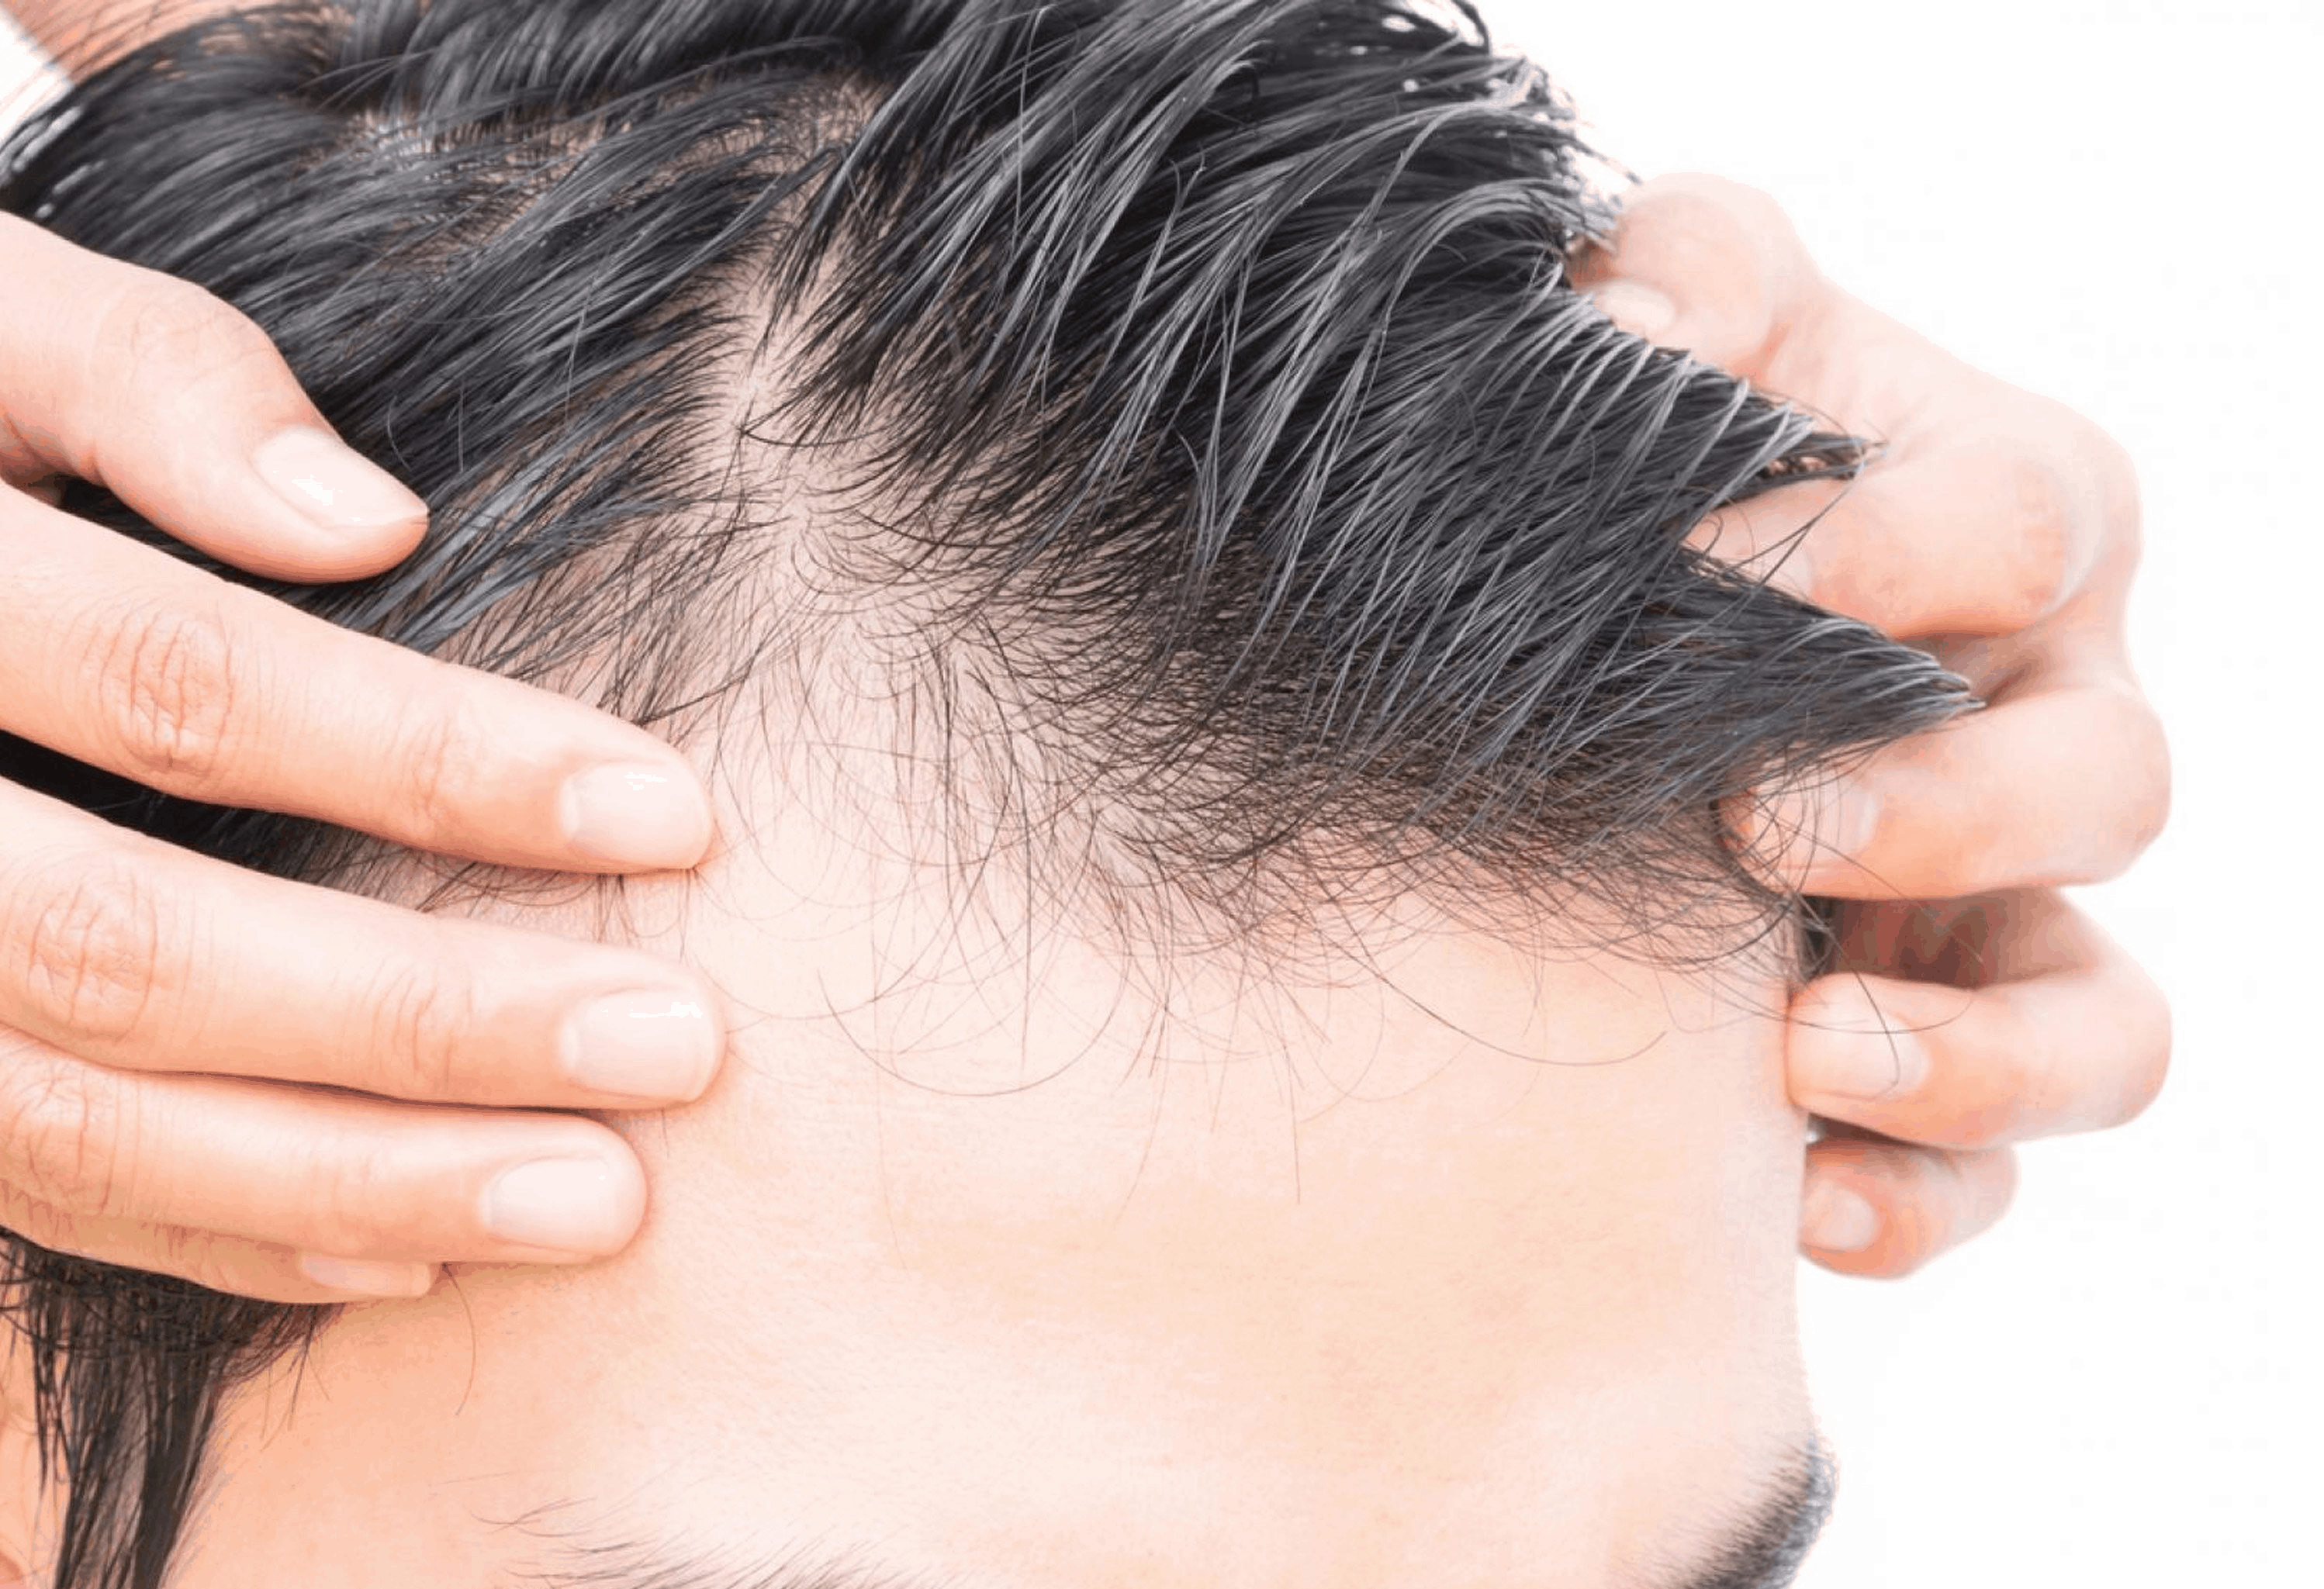 You Might be Causing Your Own Baldness